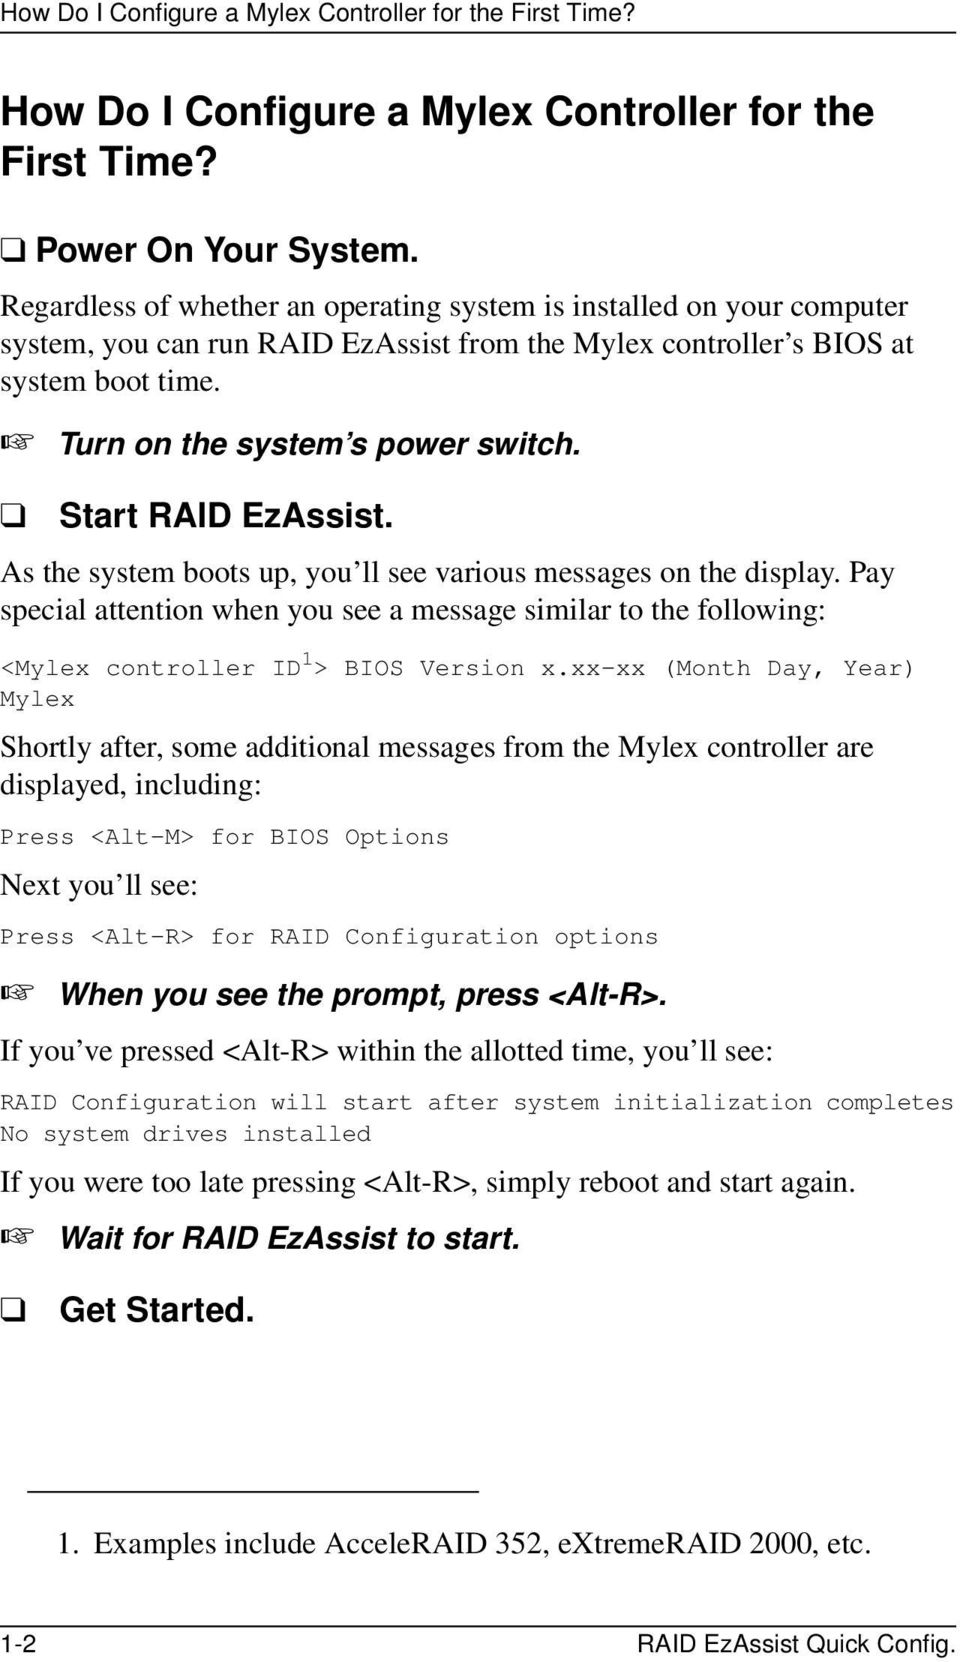 Start RAID EzAssist. As the system boots up, you ll see various messages on the display. Pay special attention when you see a message similar to the following: <Mylex controller ID 1 > BIOS Version x.